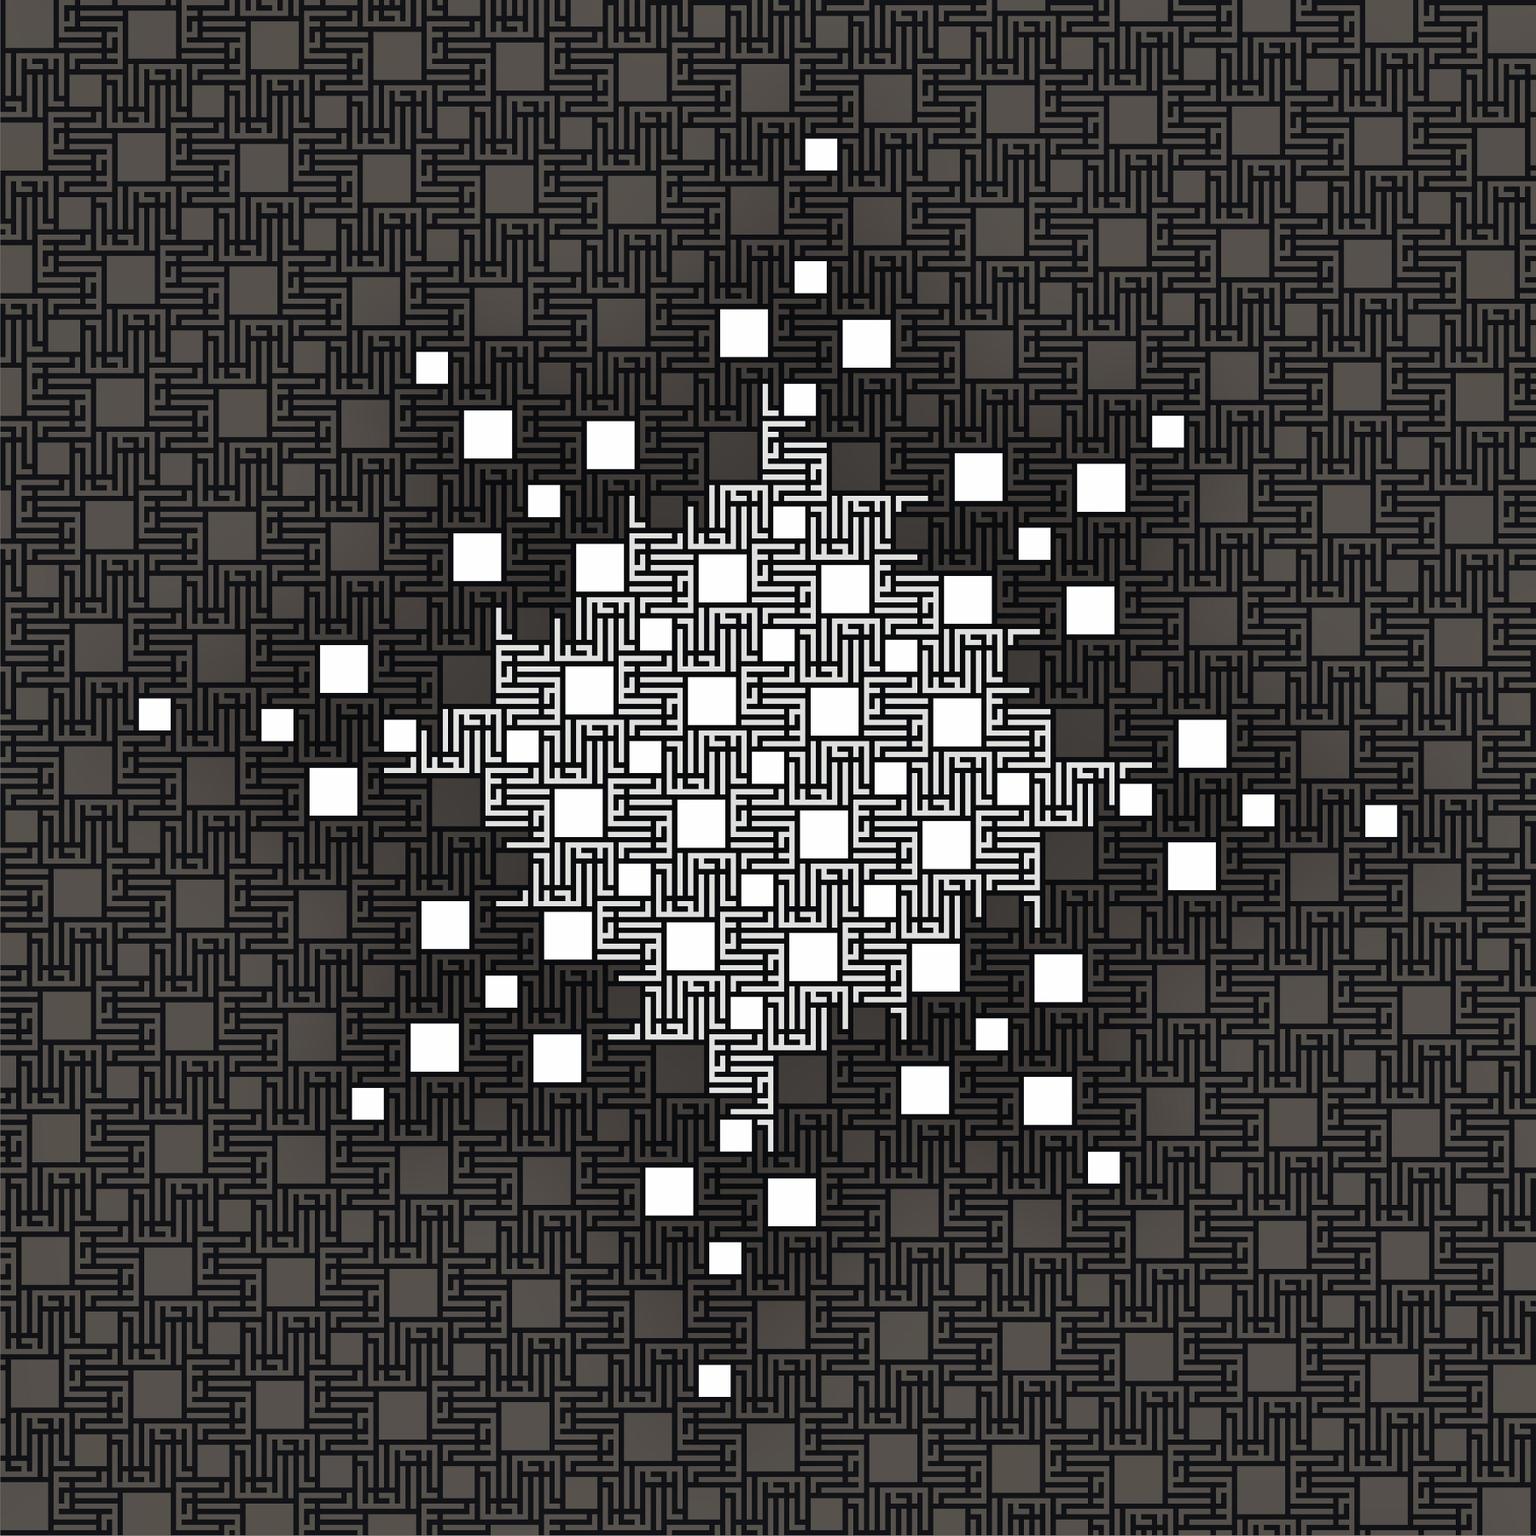 Image for entry 'The Irresistible - White Star (Al Jabbaar calligraphic tessellation)'